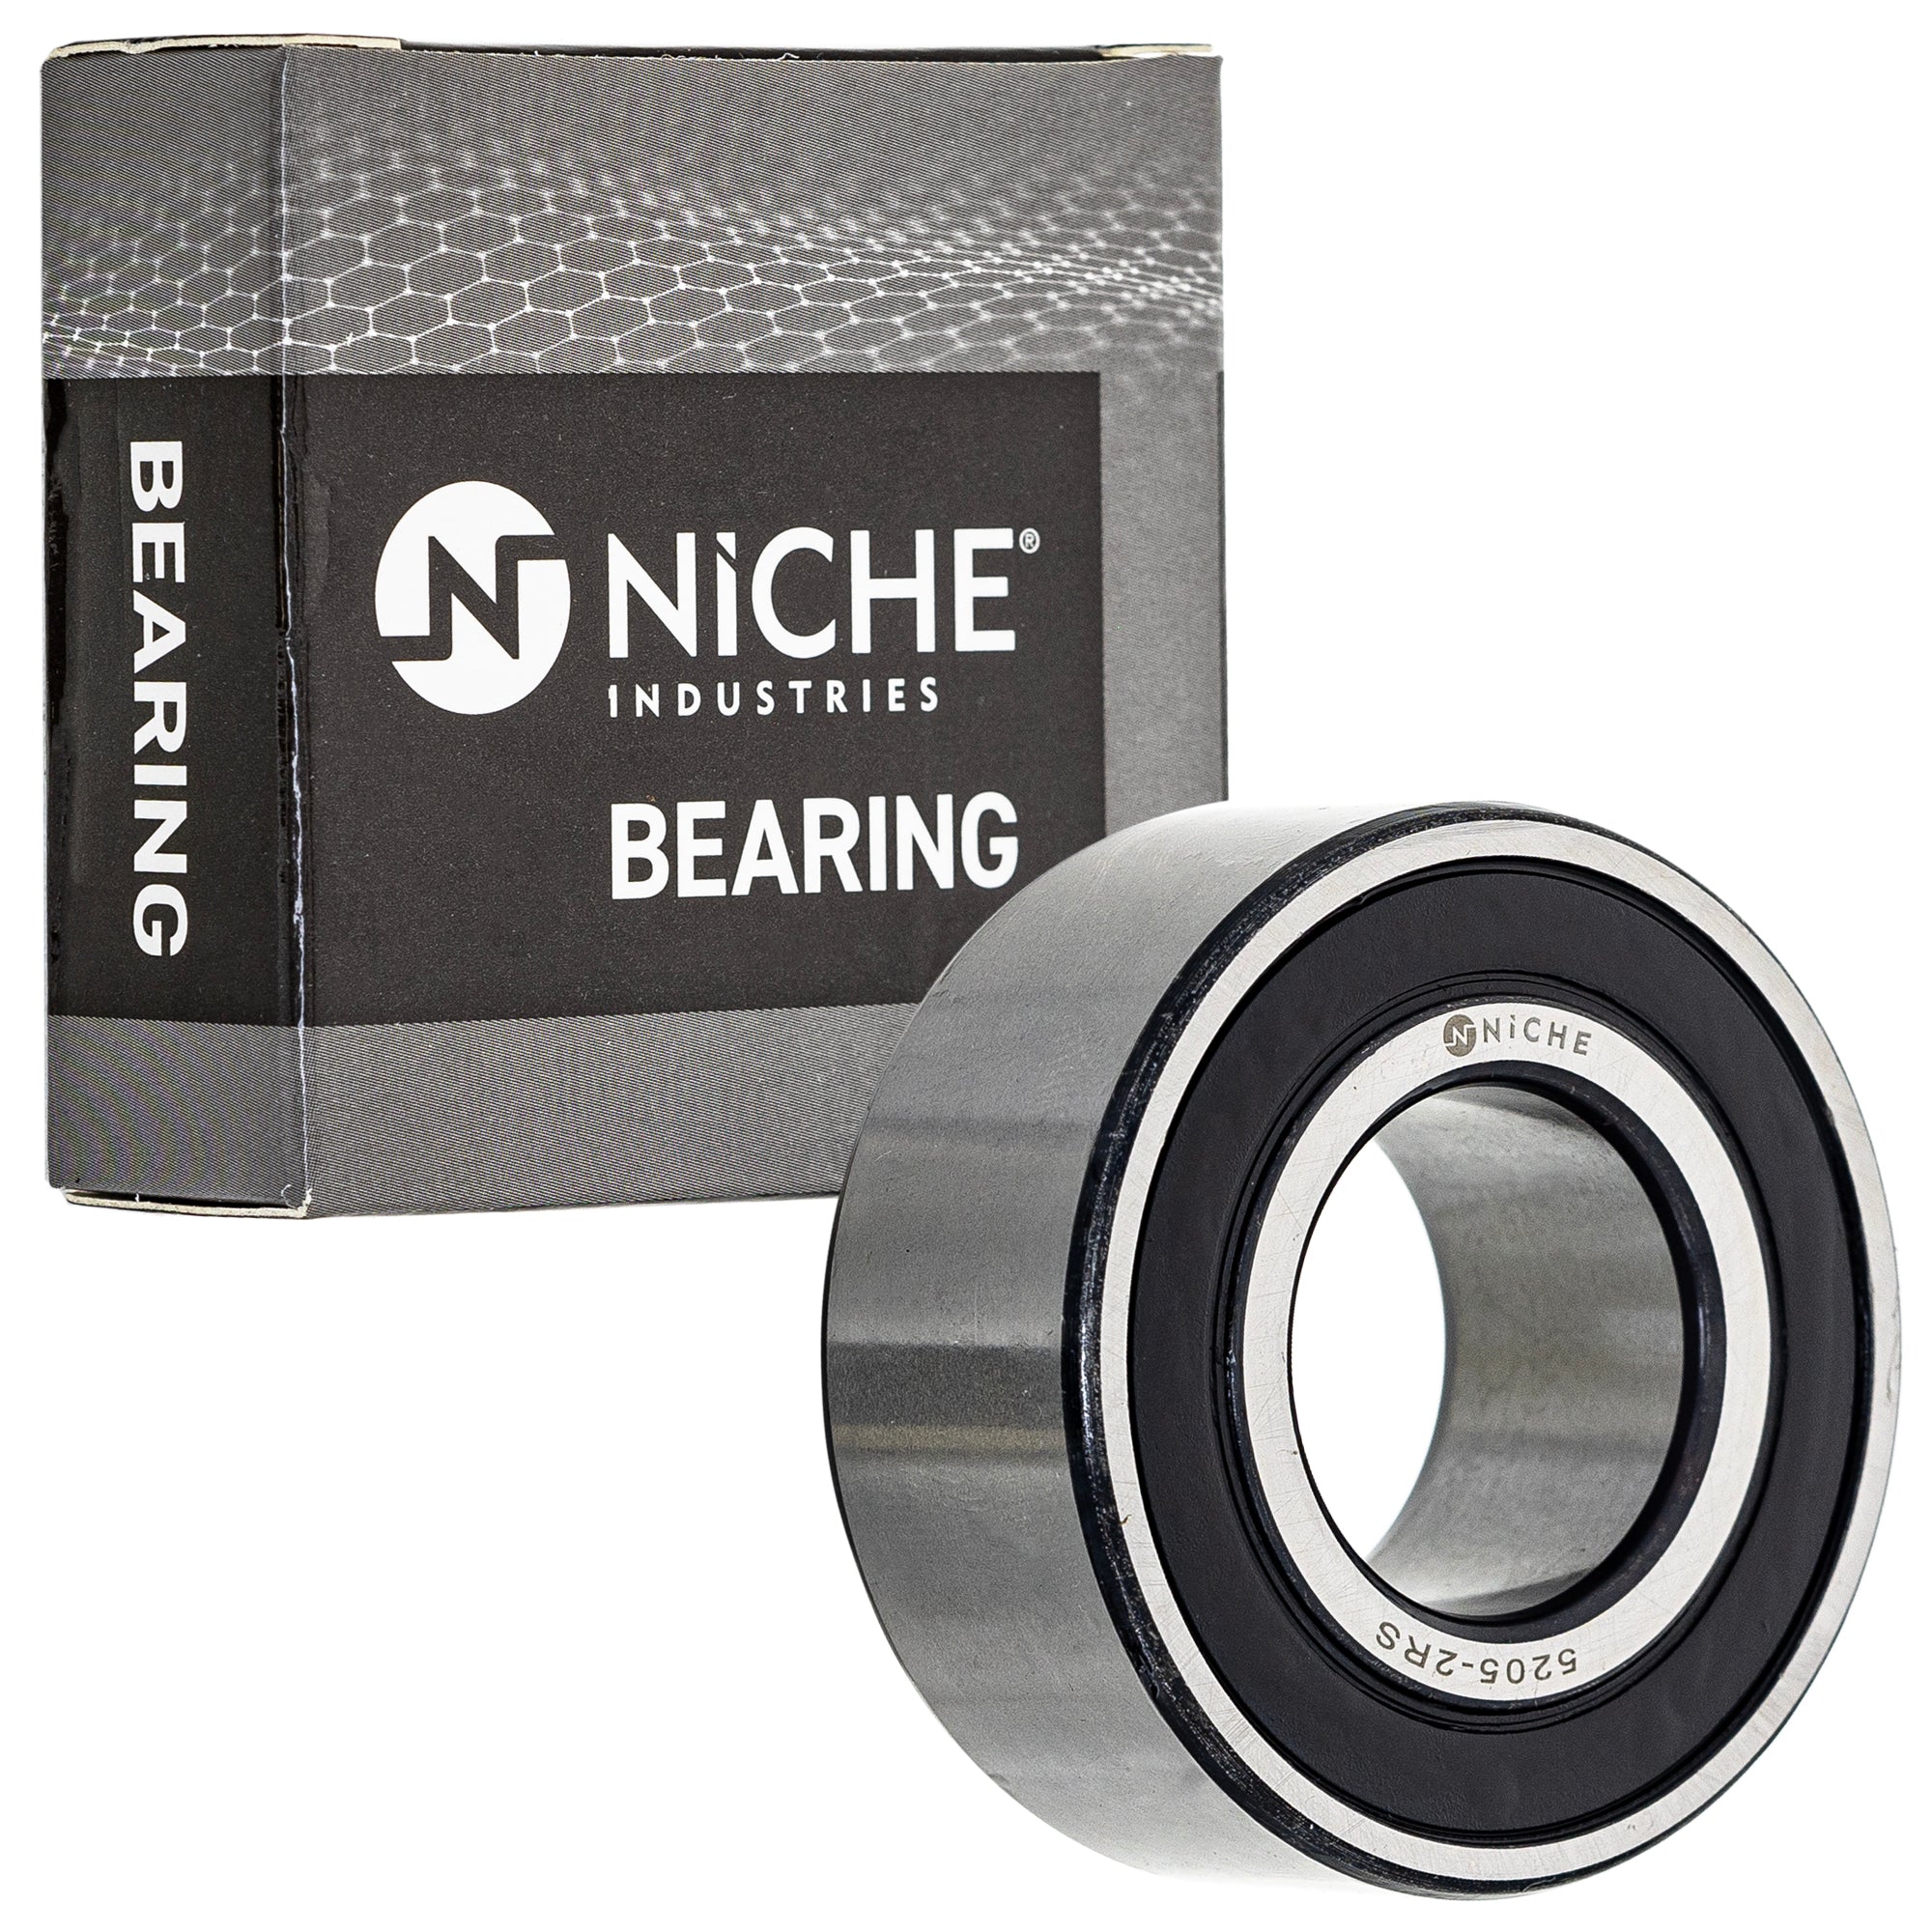 NICHE 519-CBB2279R Bearing for zOTHER K1100RS K1